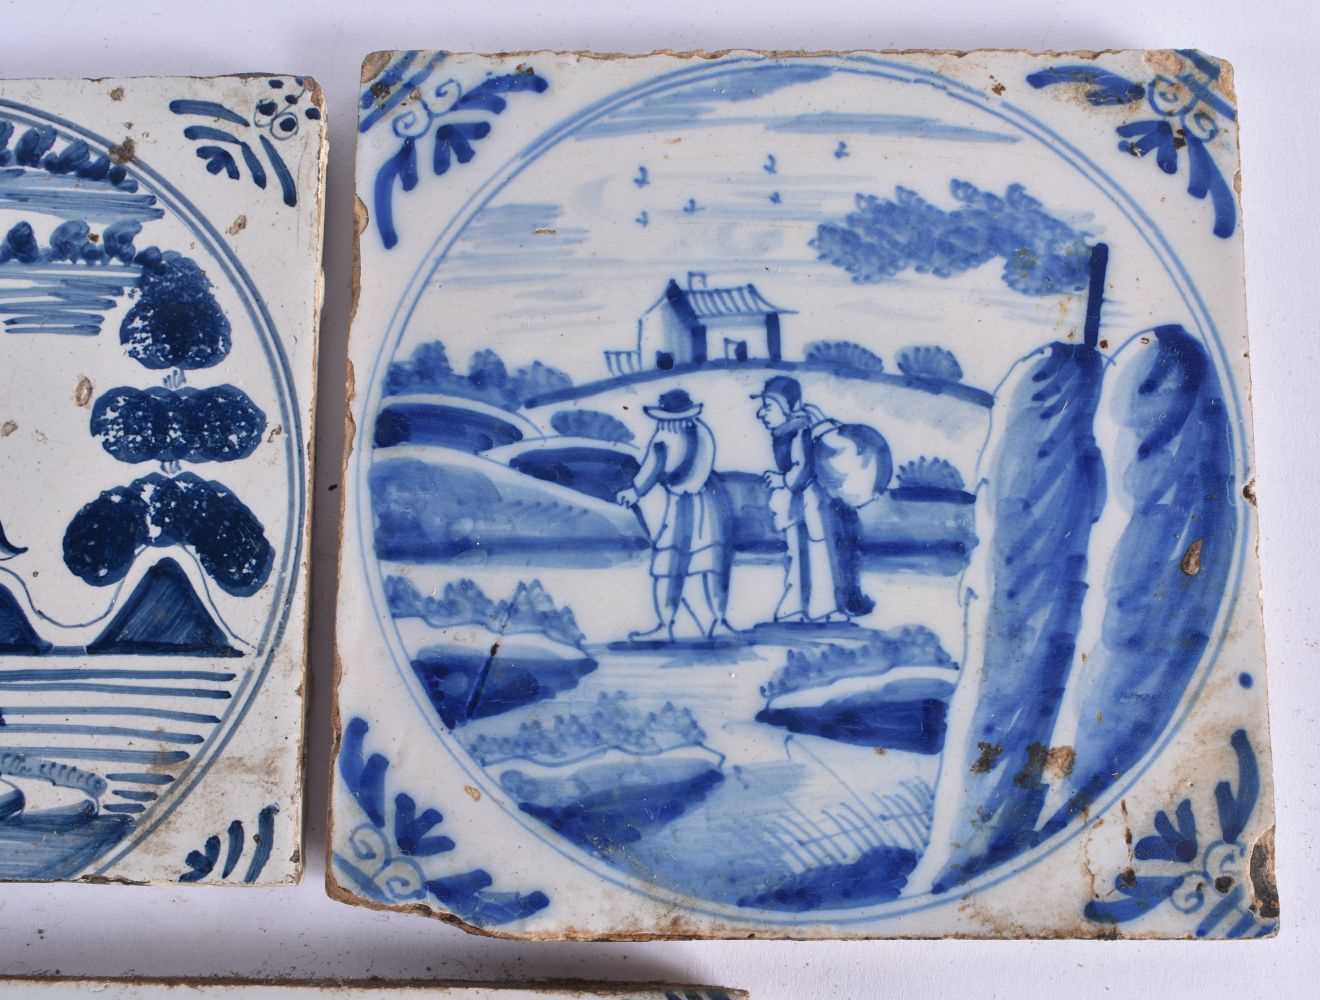 FIVE DELFT BLUE AND WHITE TILES. 12.5 cm square. (5) - Image 3 of 5